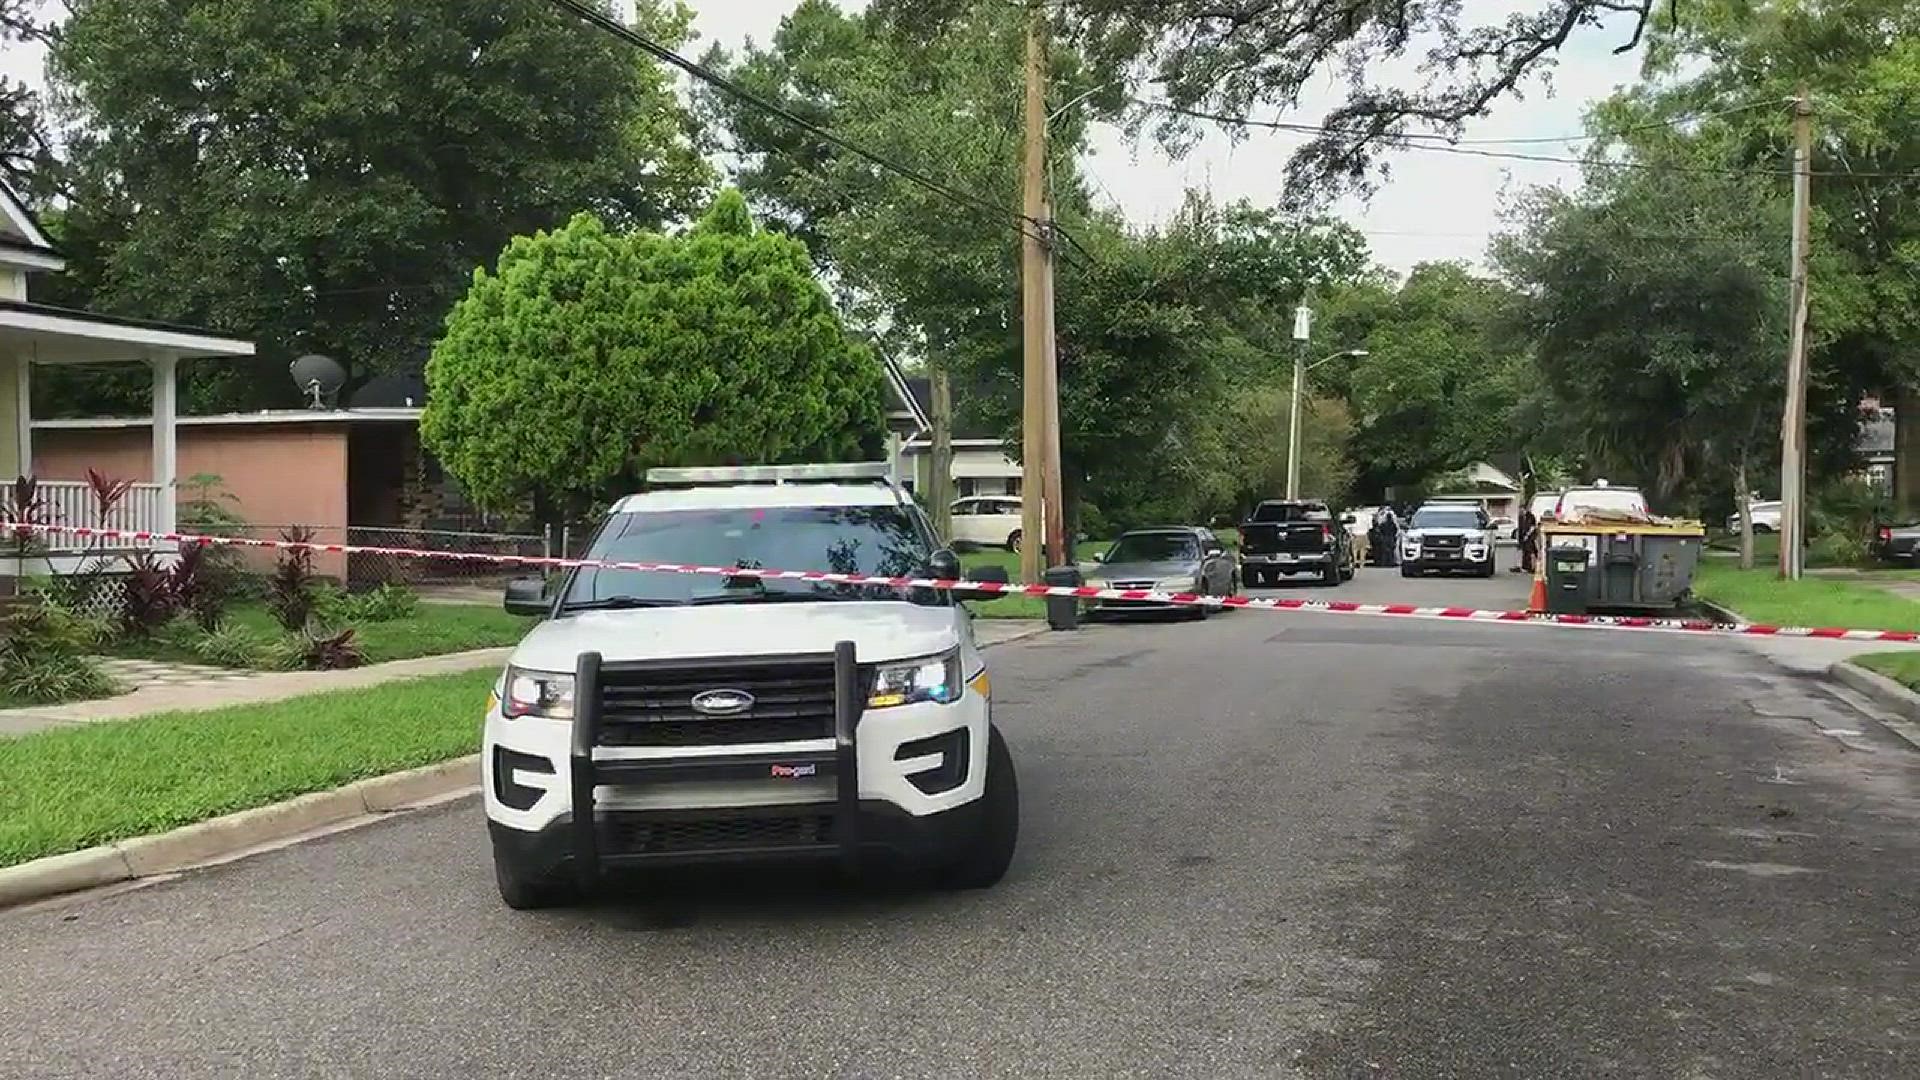 The Jacksonville Sheriff's Office said the shooting was reported at 2700 Myra Street Tuesday morning.
Credit: Renata Di Gregorio